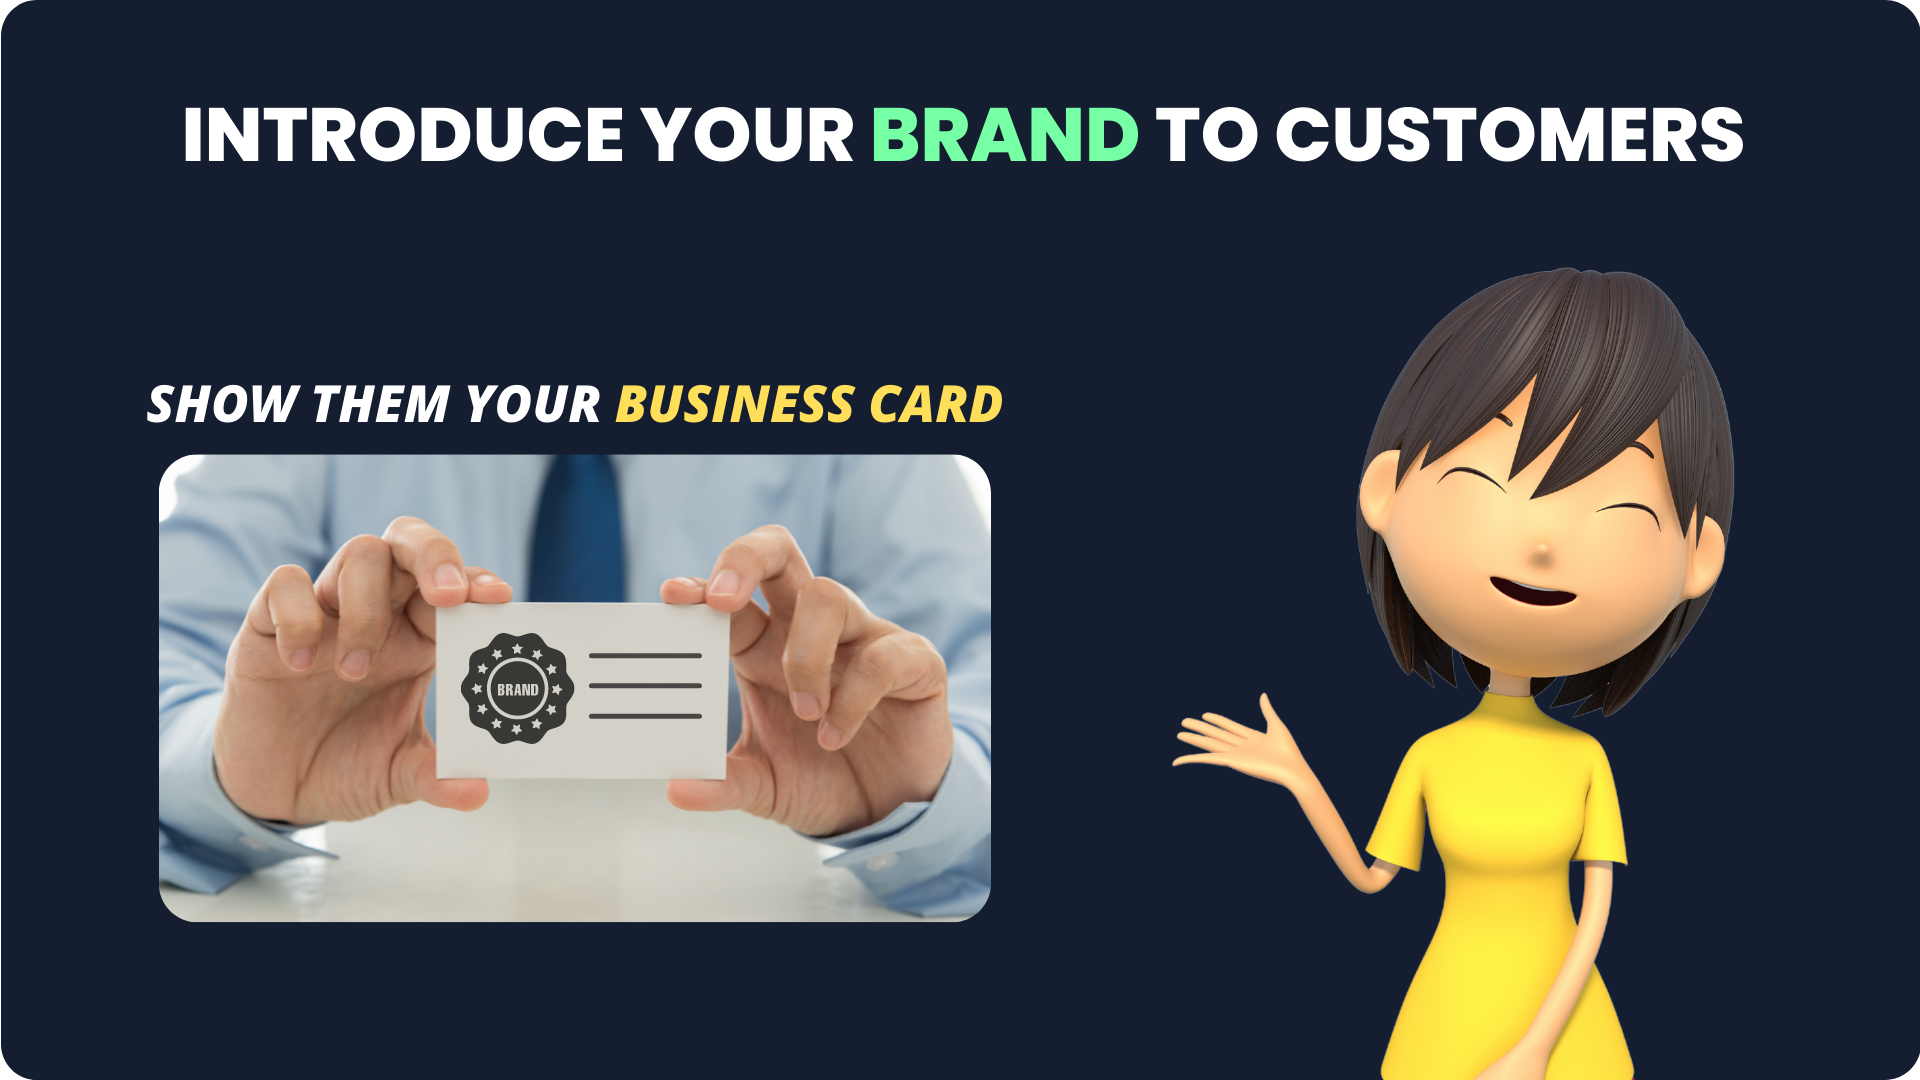 Introduce Brand to Customers